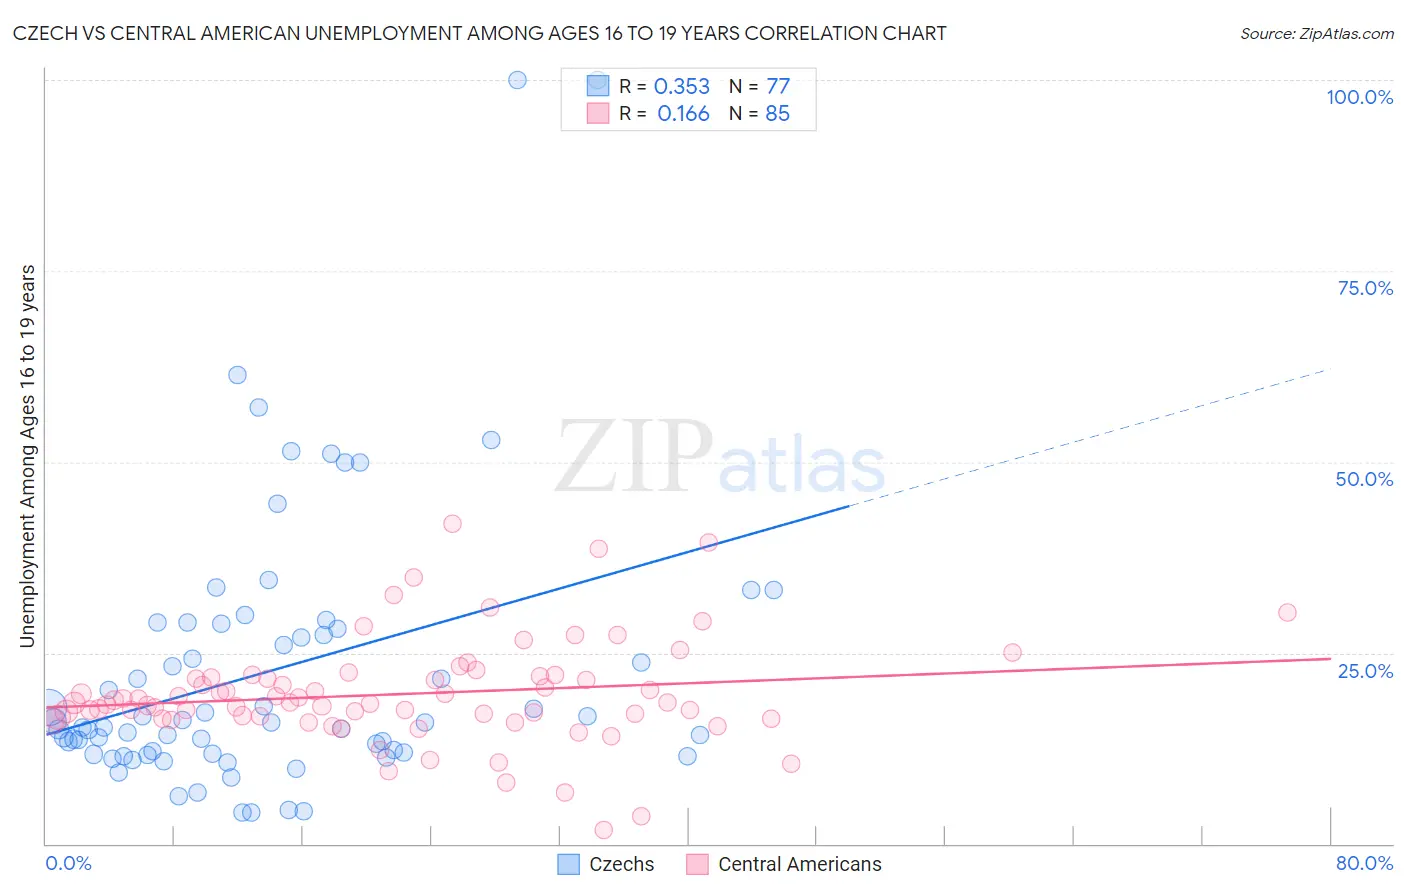 Czech vs Central American Unemployment Among Ages 16 to 19 years